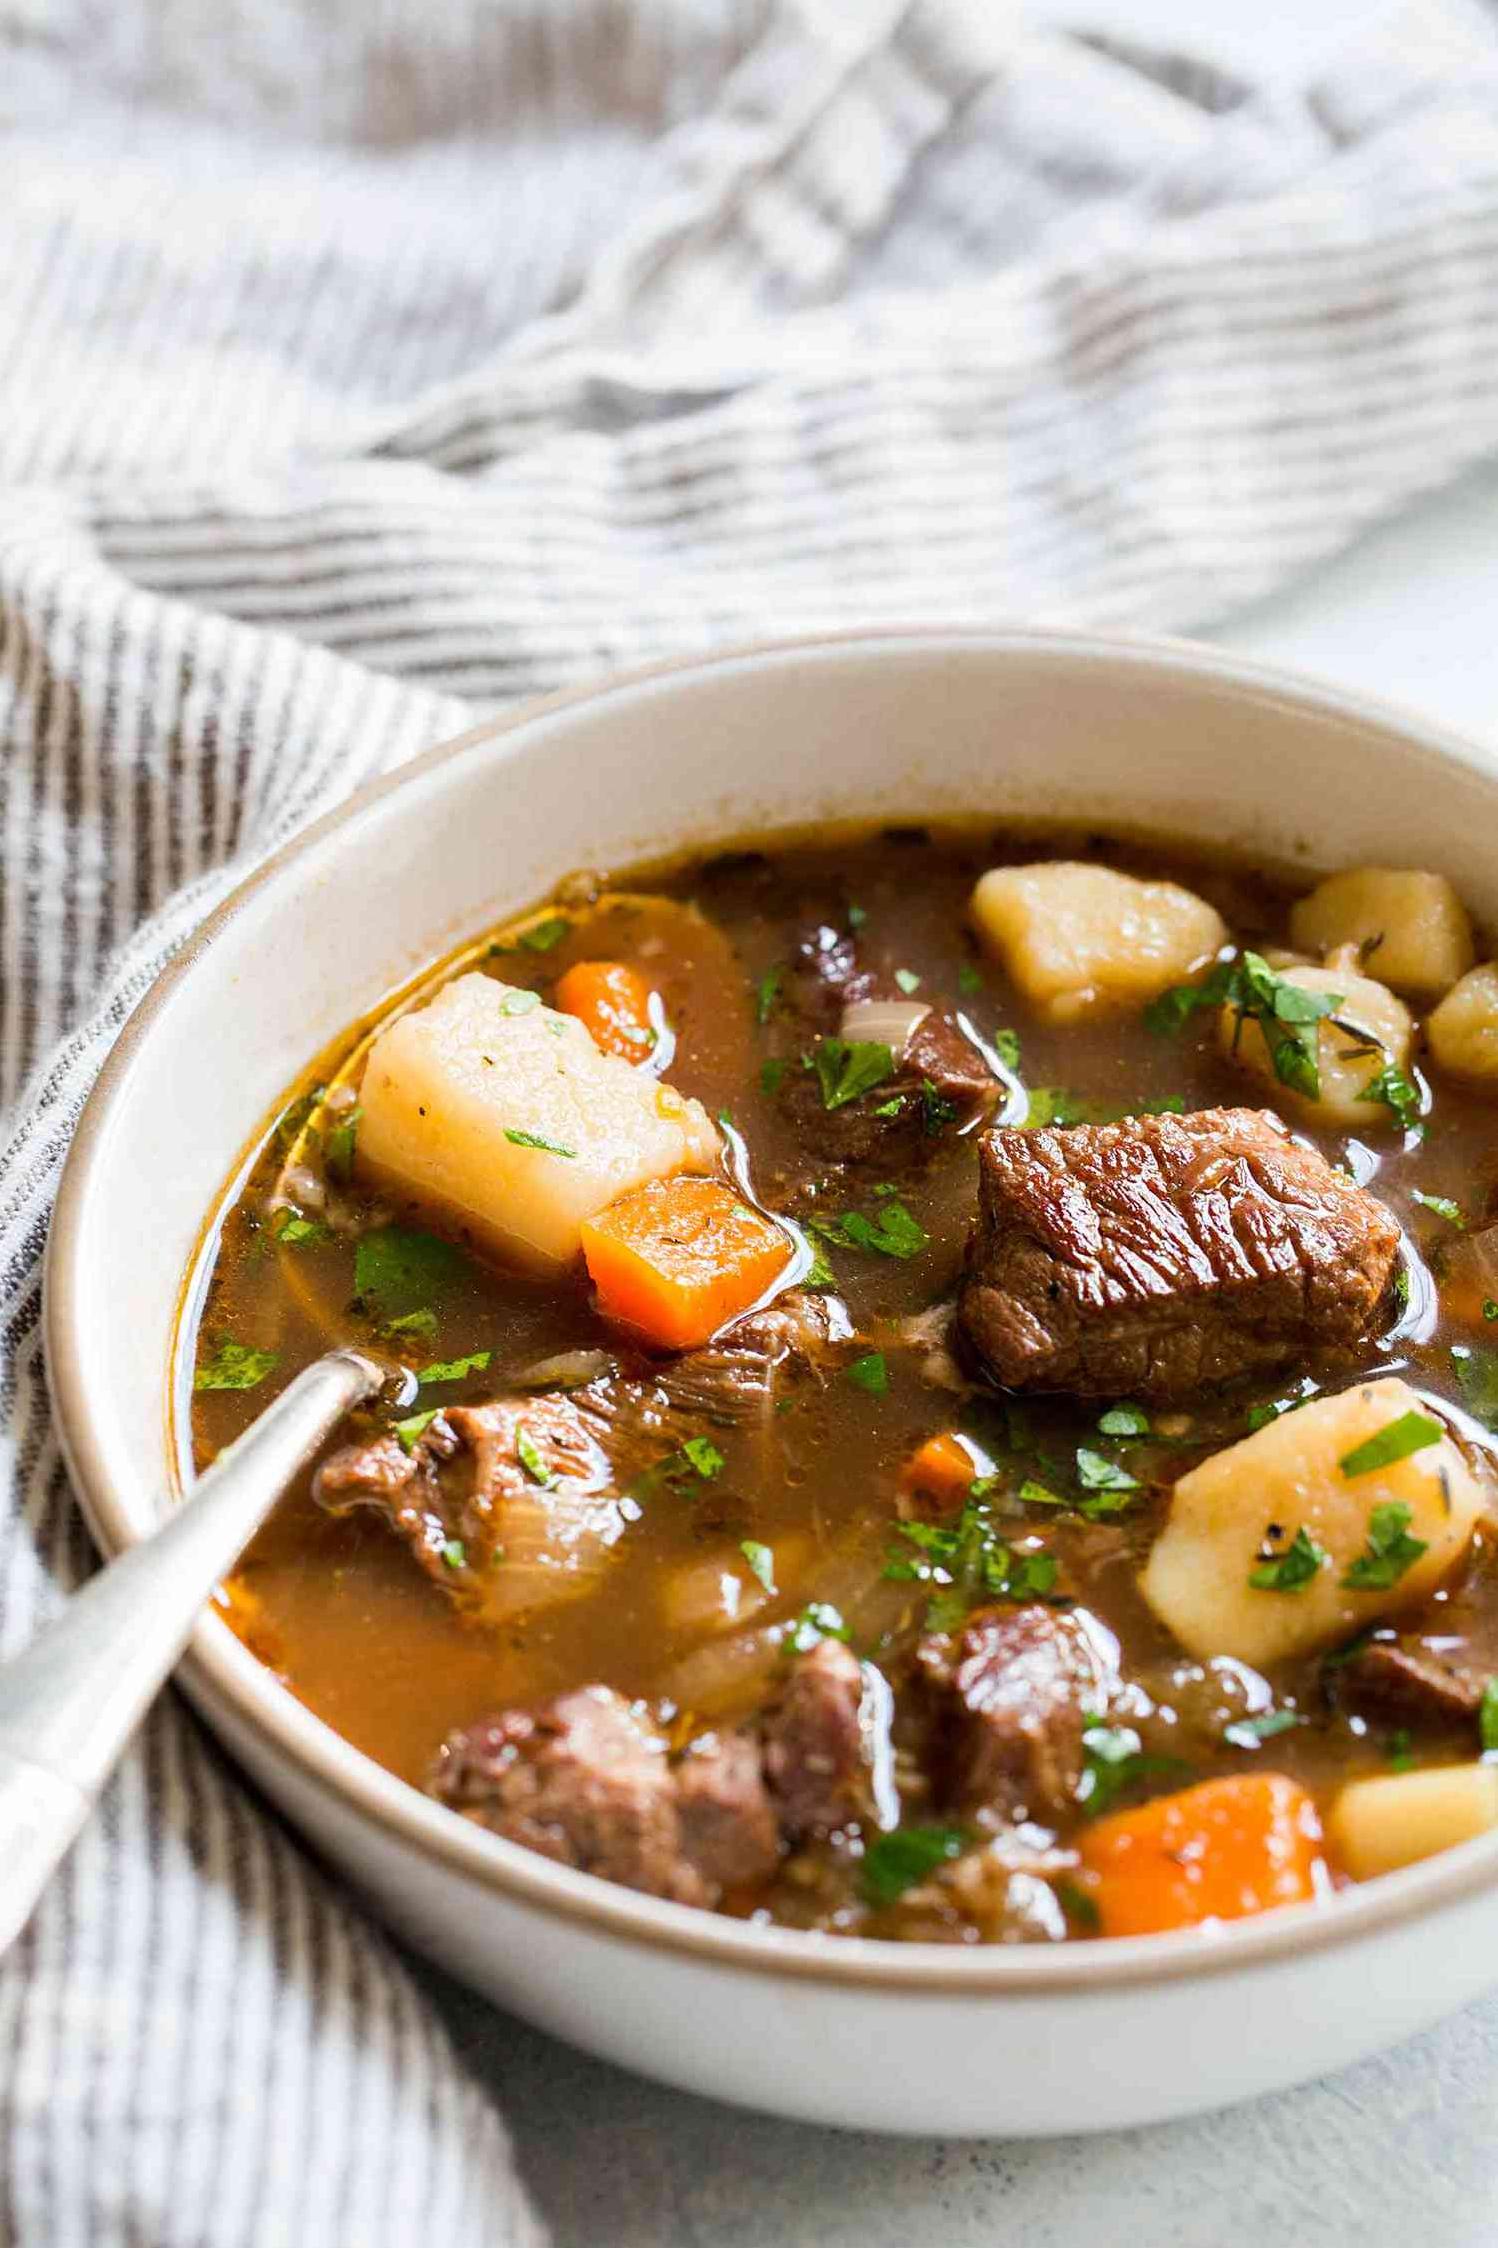  The ultimate stew for St. Patrick's Day or any chilly evening.